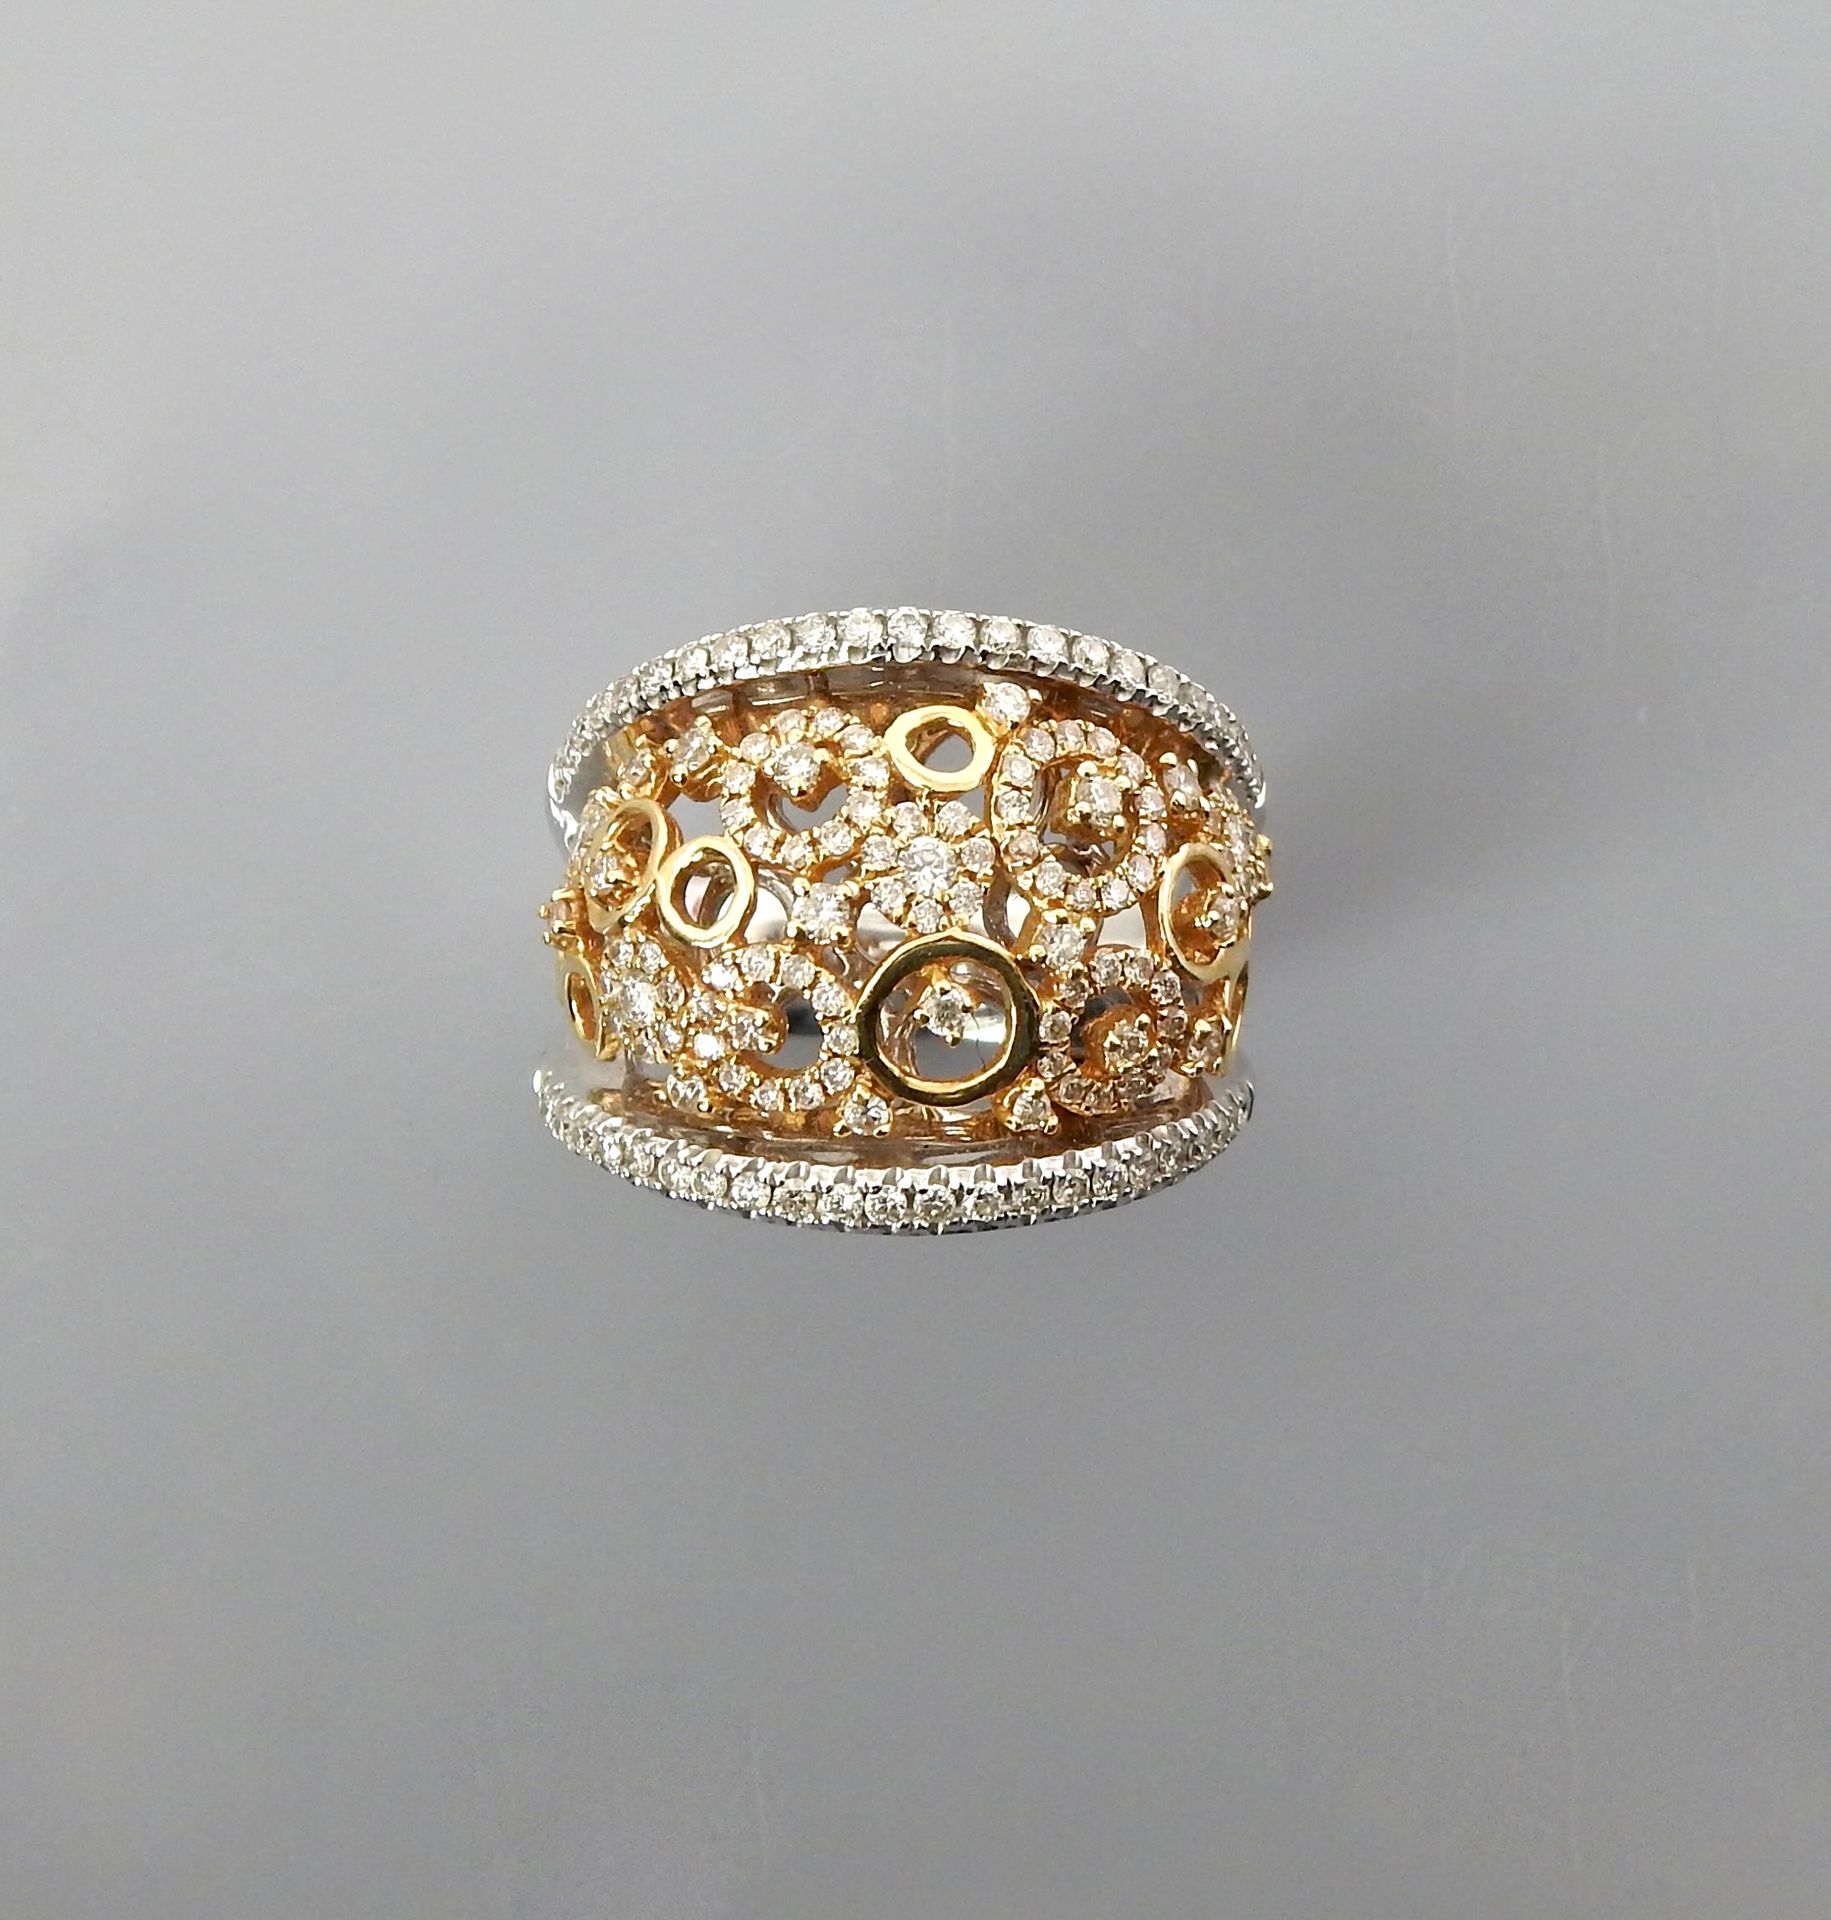 Null Ring in yellow and white gold, 750 MM, covered with diamonds, size: 55, wei&hellip;